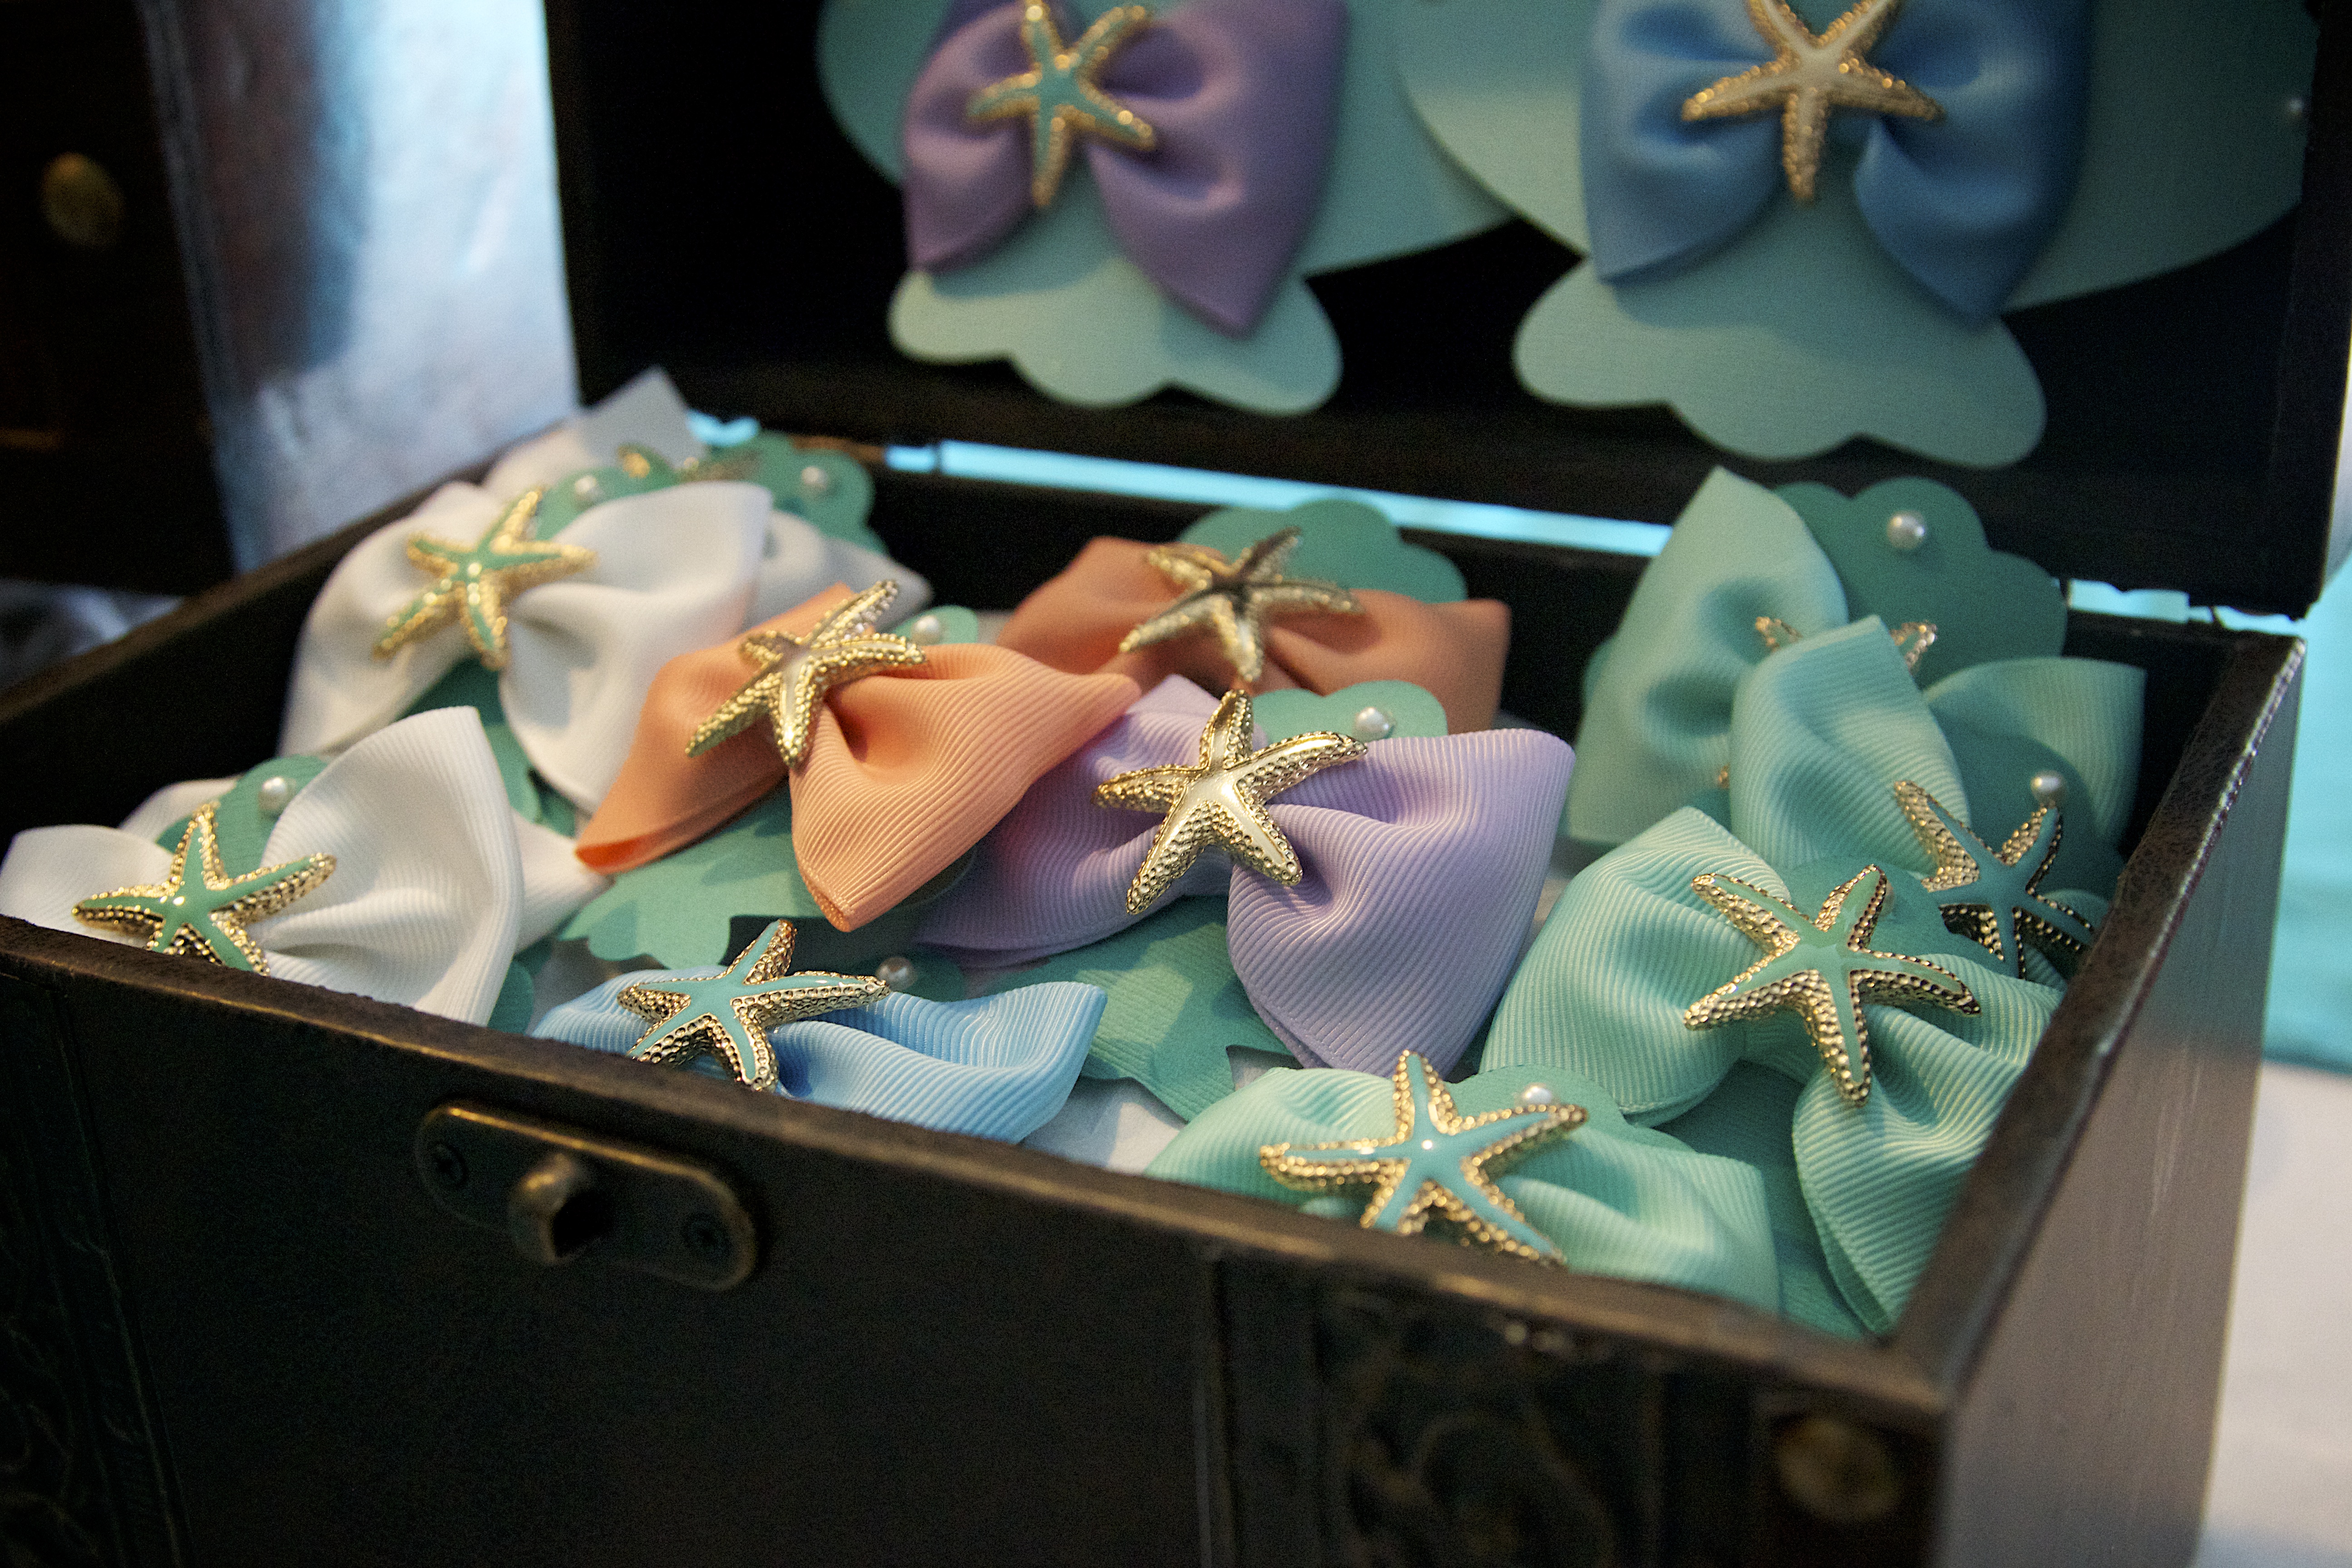 Starfish Hairbows at this "Under the Sea" Birthday Party